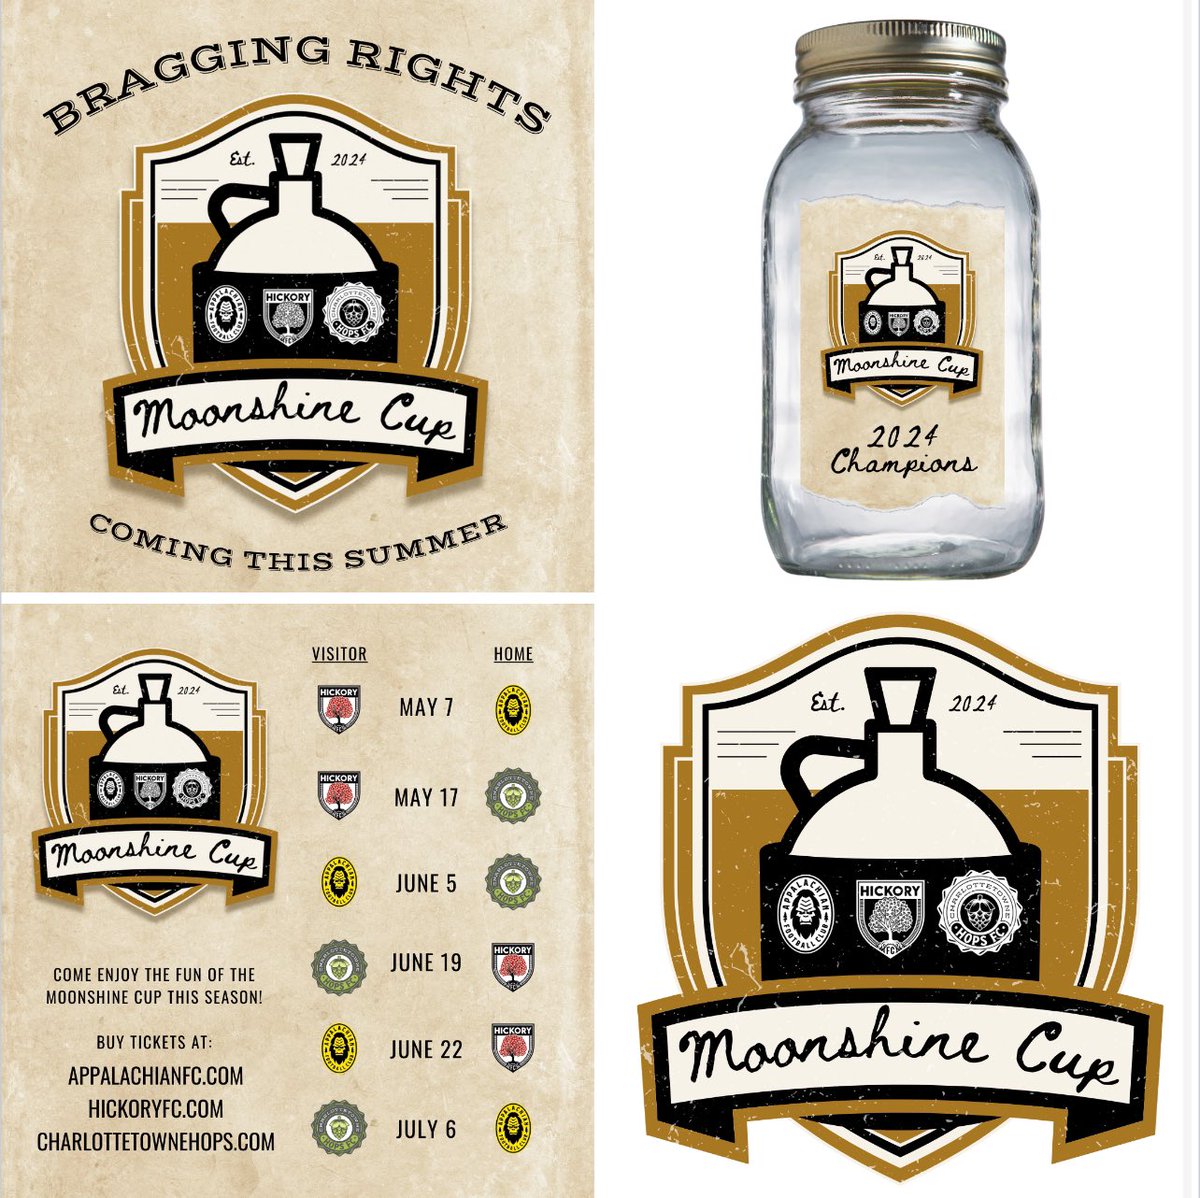 In today’s biggest announcement in the Soccer World, 3 NPSL teams in North Carolina announce the Moonshine Cup. Hickory FC, Charlottetowne Hops FC & Appalachian FC will battle for Moonshine Mason Jar. Kicks off when Hickory FC travels to Boone to play Squatchiest team in 🇺🇸! 🏆